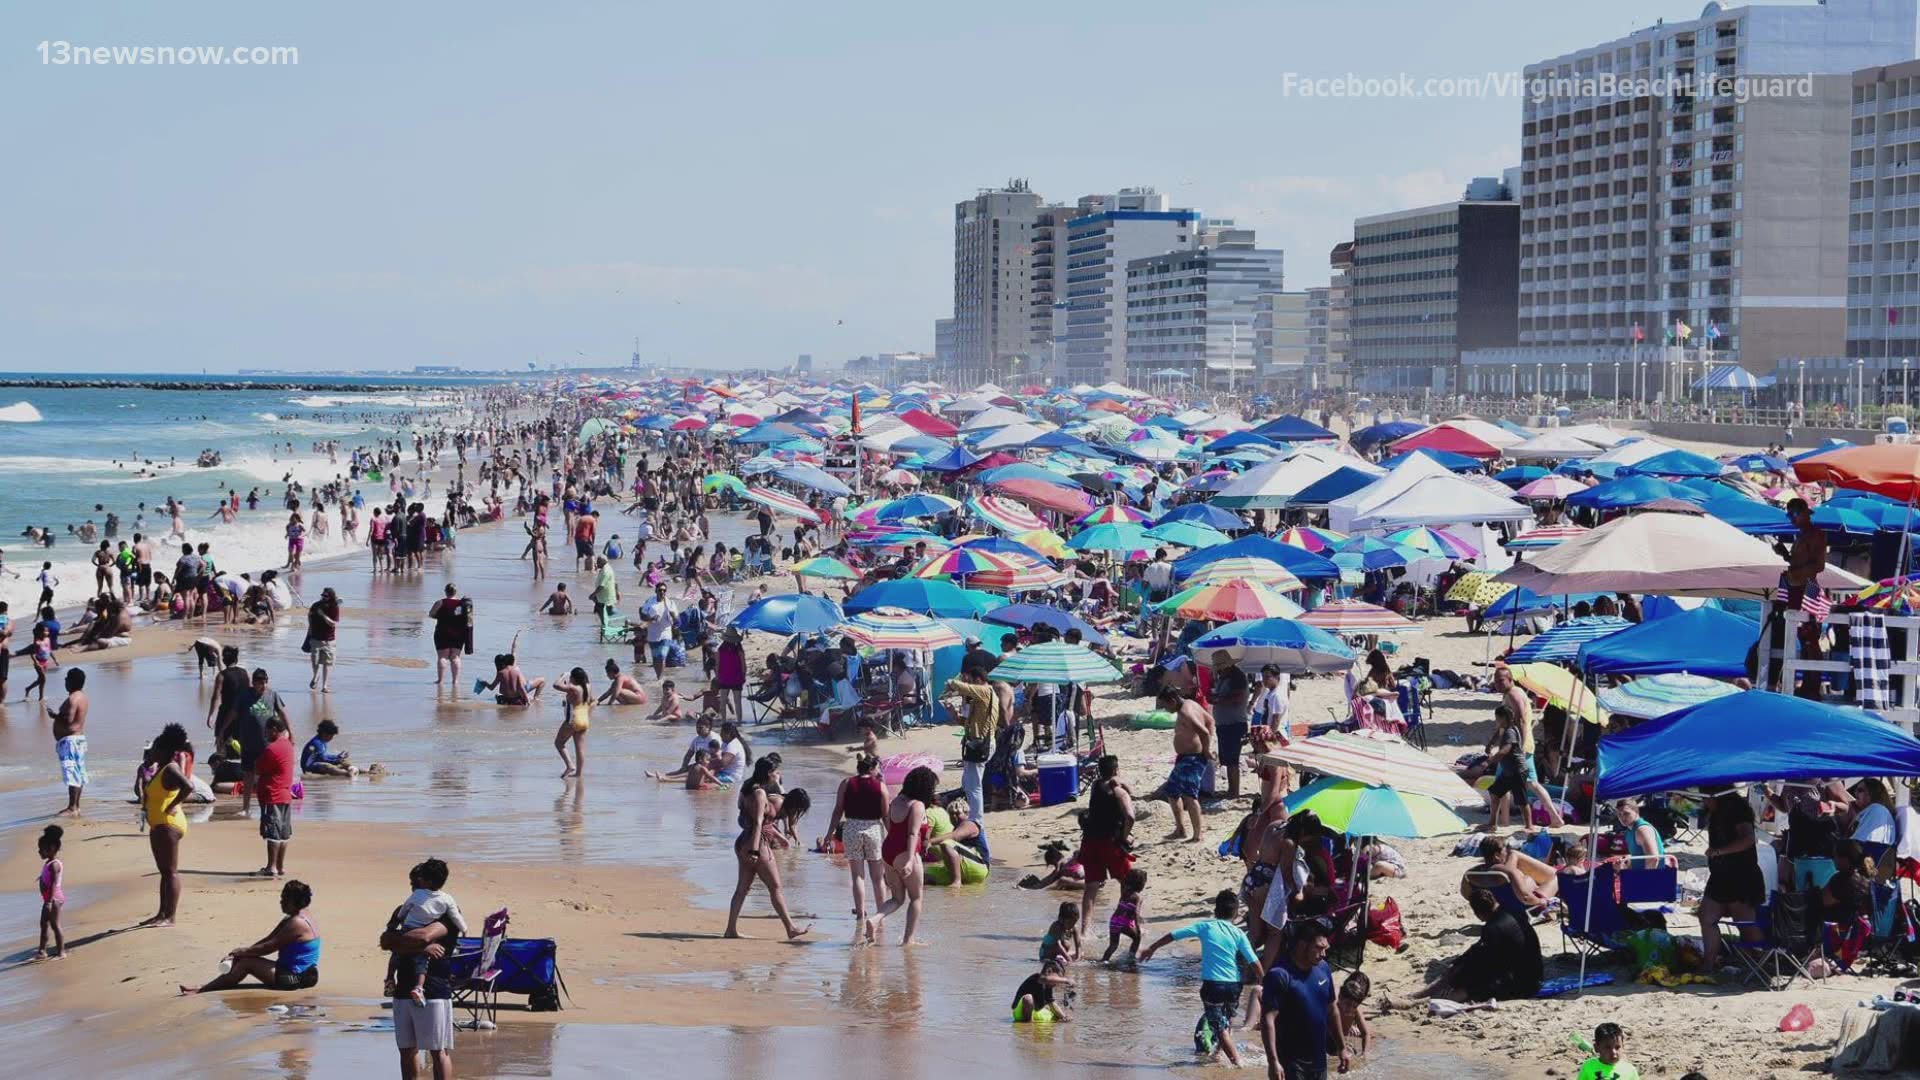 130 children lost, found at crowded Virginia Beach Oceanfront over